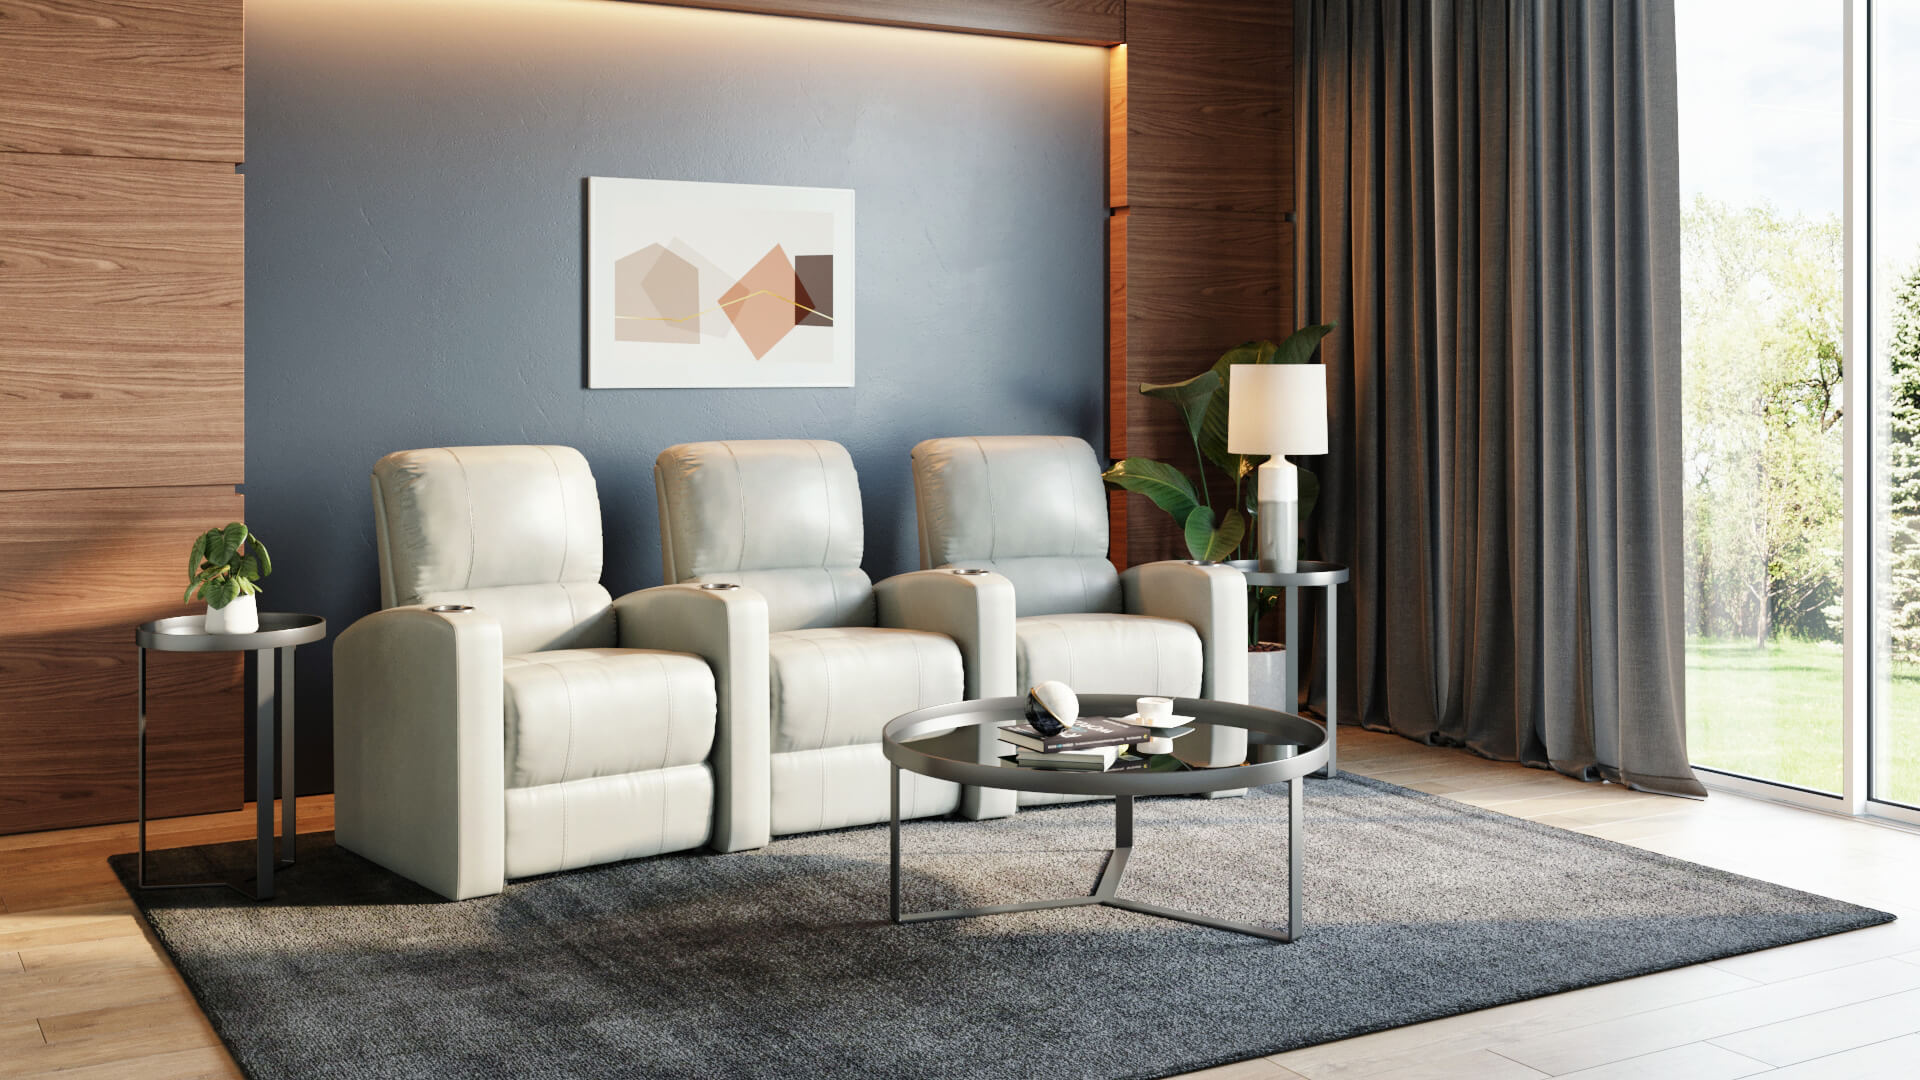 Leather Armchairs Lifestyle Render